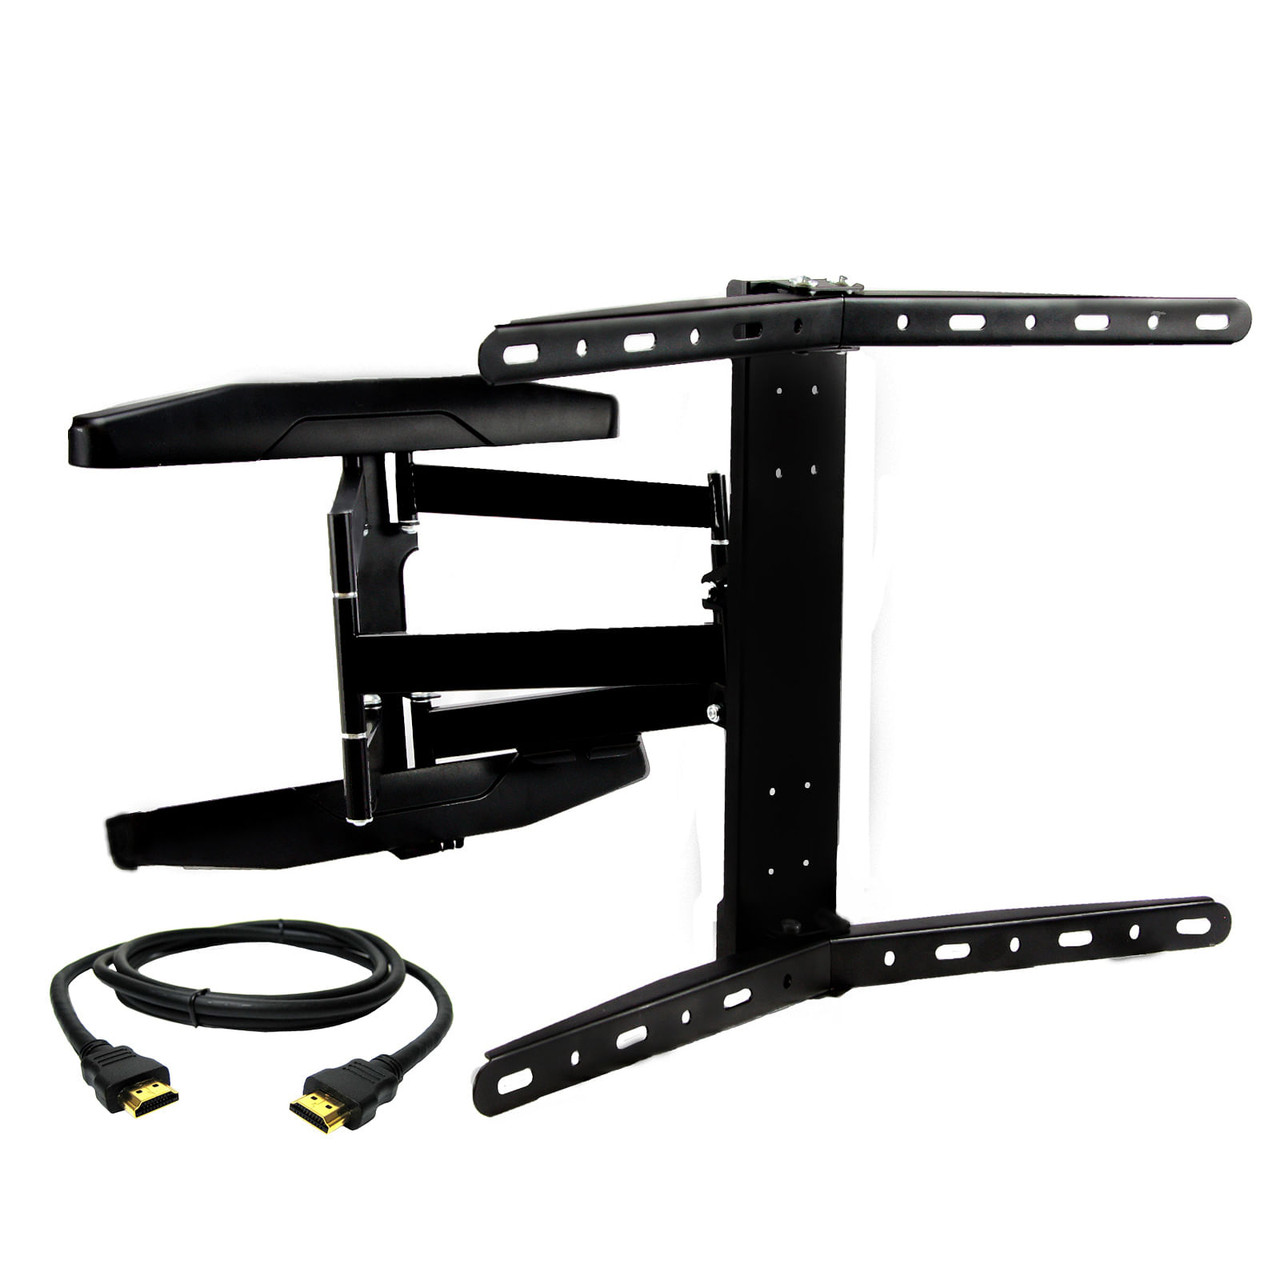 MegaMounts Full Motion Wall Mount for 32-70 In. Curved Displays with HDMI Cable